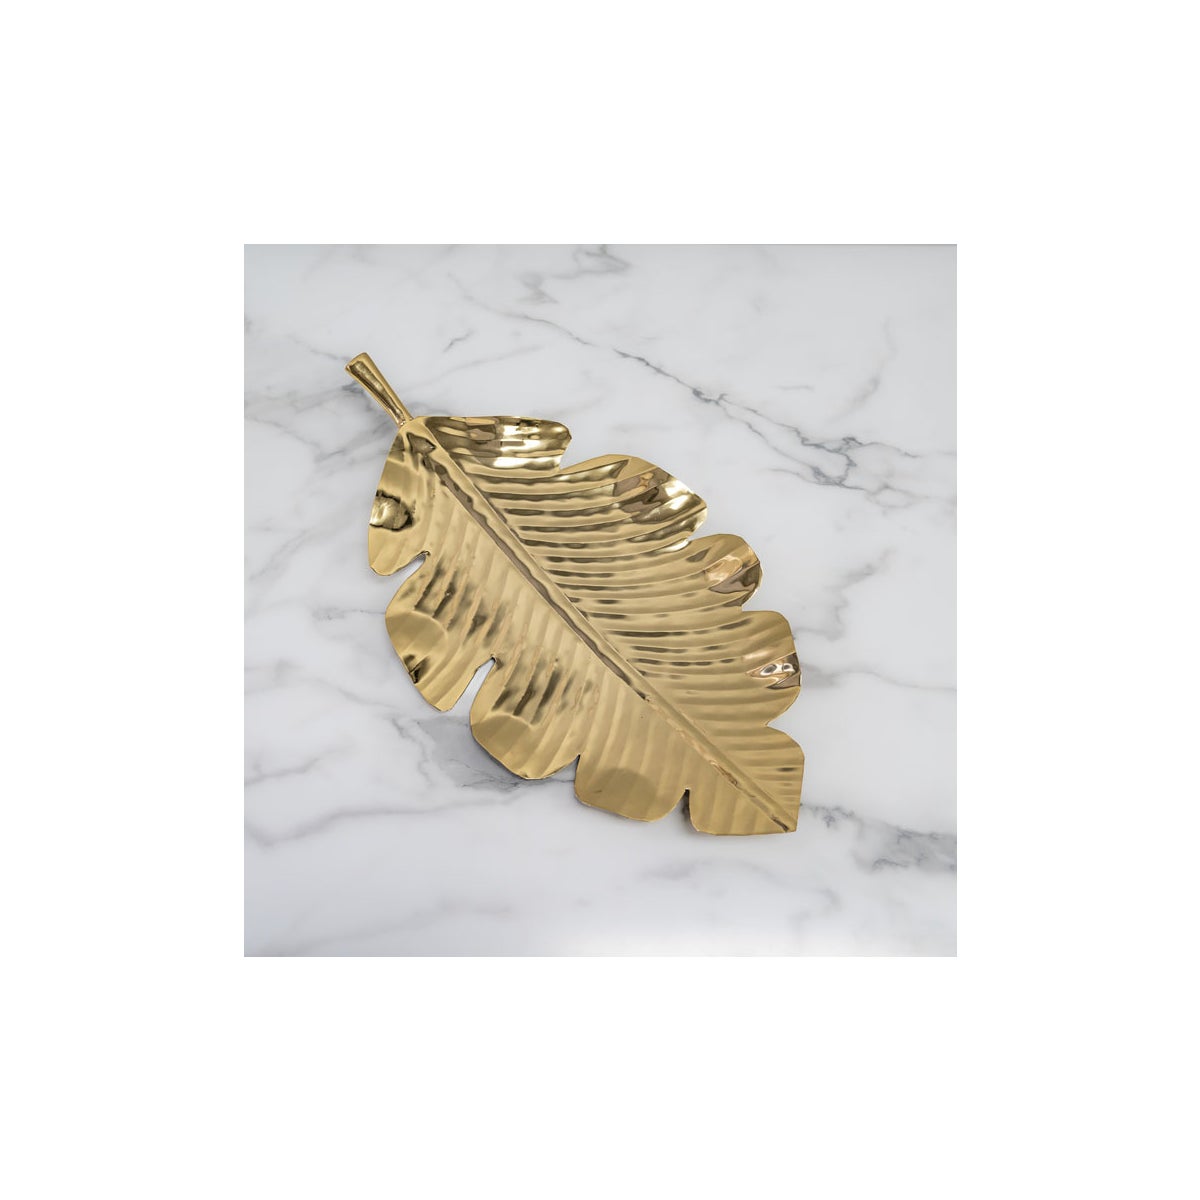 Gold Glided Leaf Shaped Stainless Steel Tray